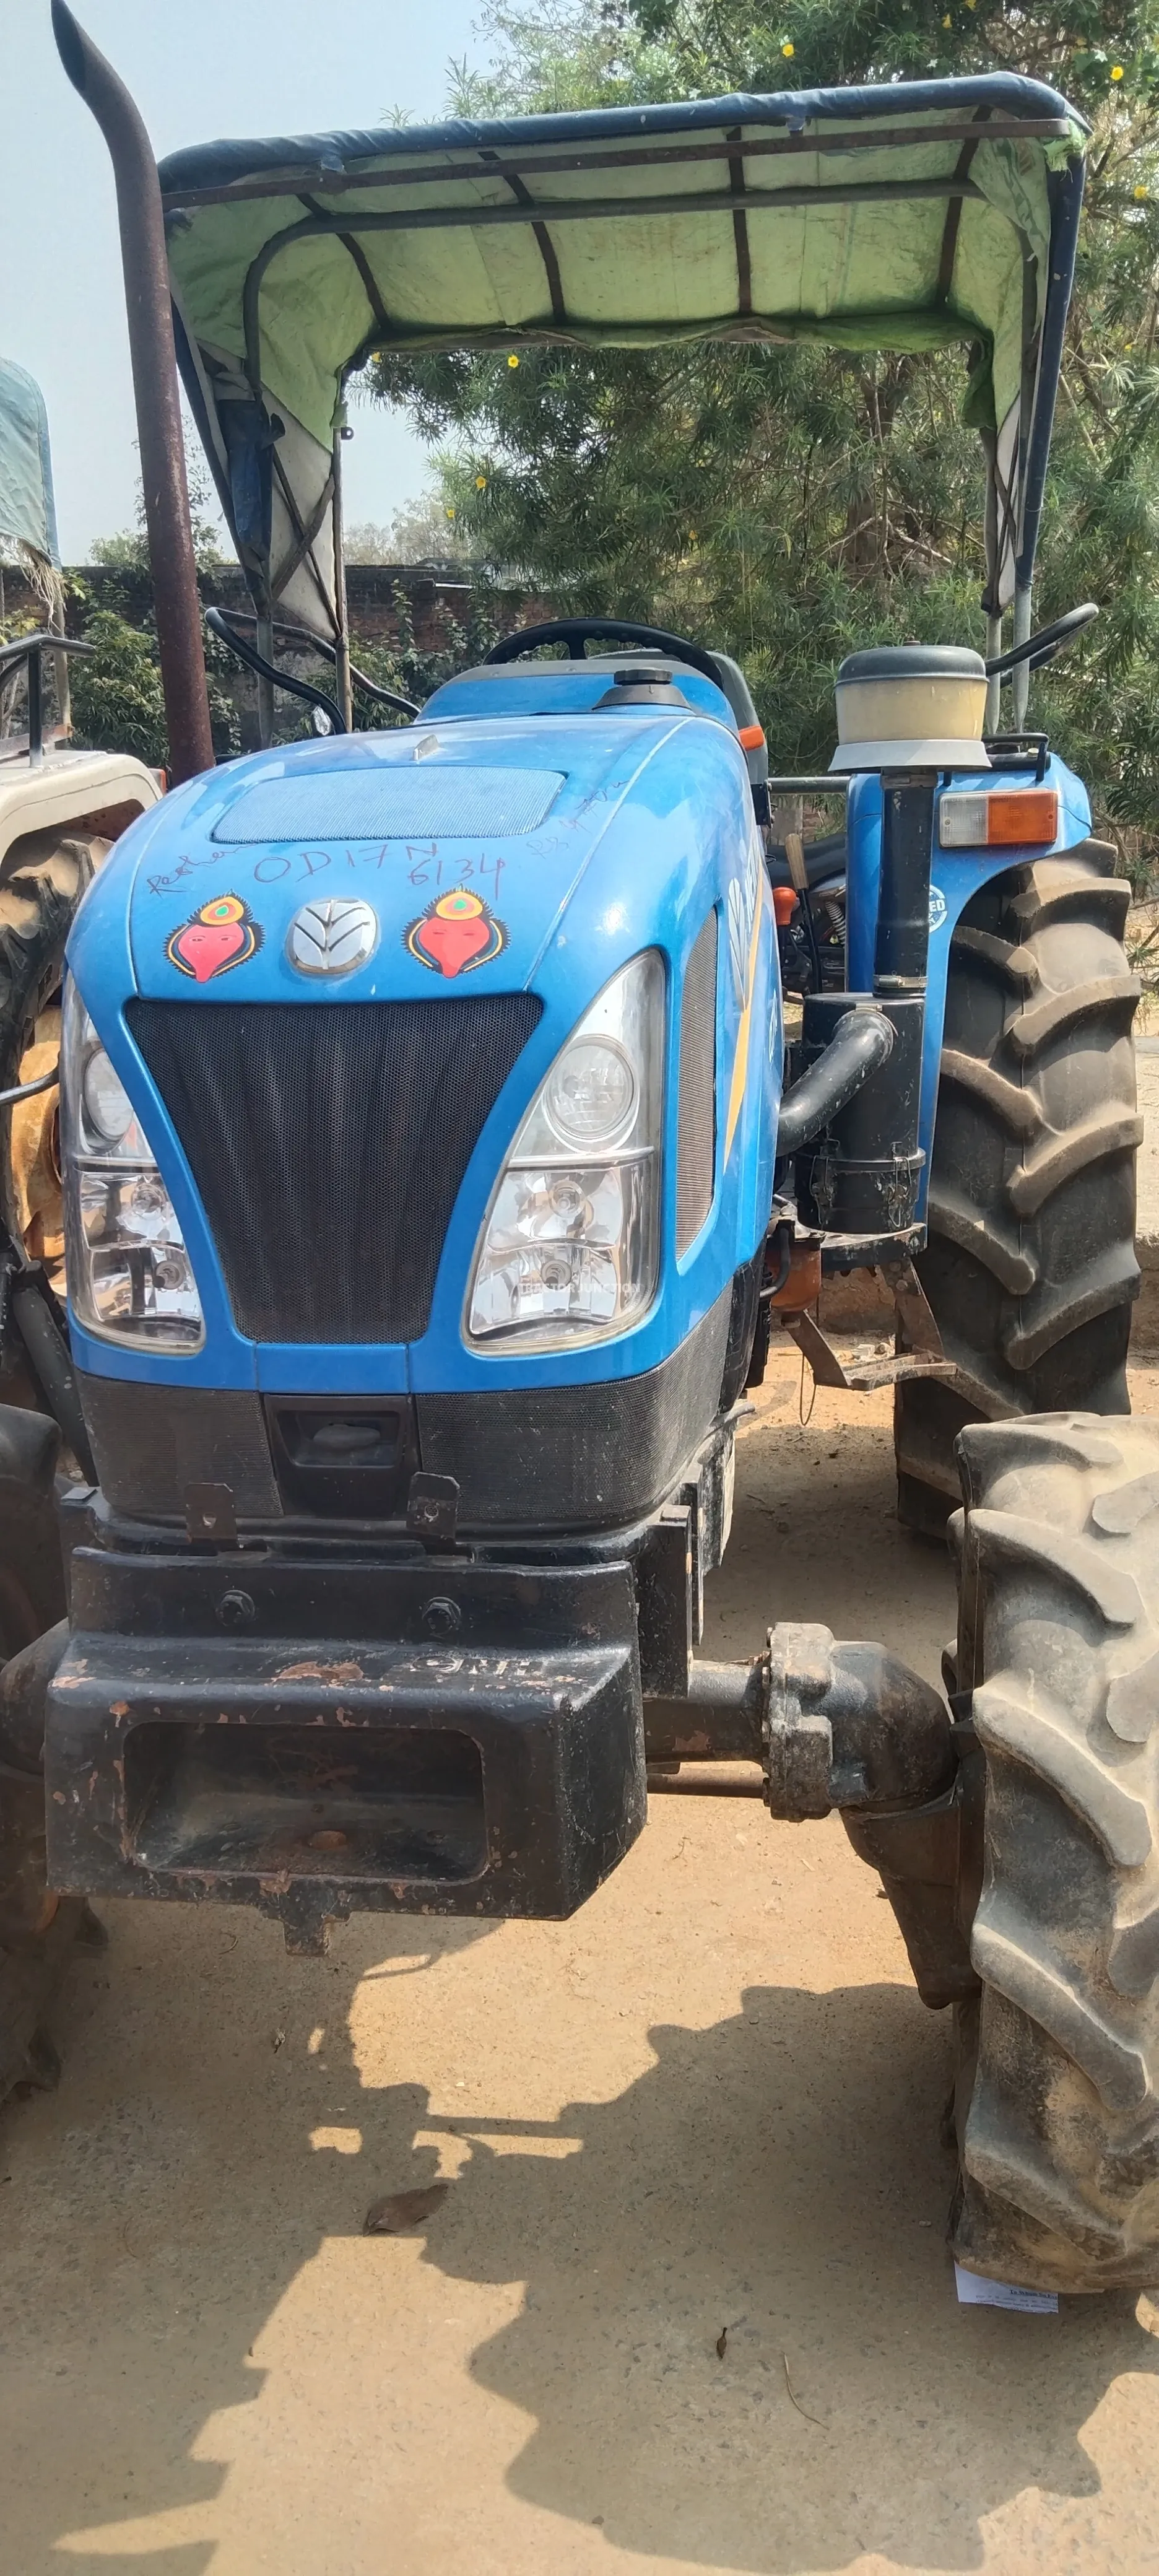 New Holland Excel 4710 4WD